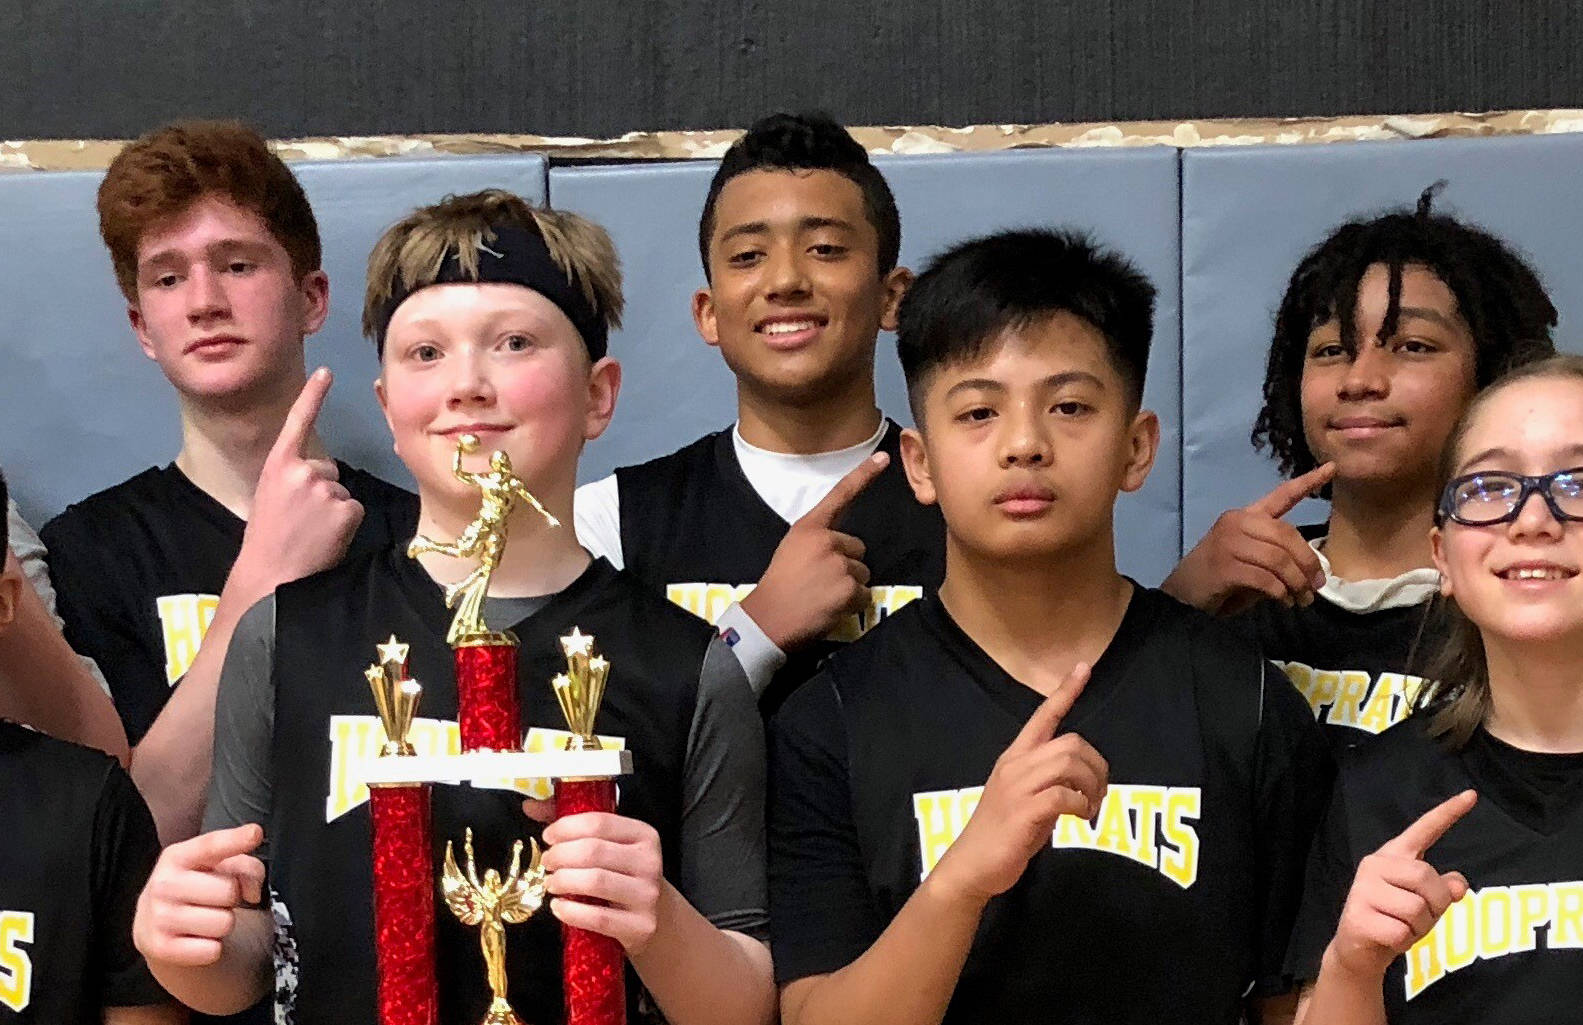 Antone Araujo, center and back, is playing for the Alaskan Native TruGame team at the Jr. NBA Global Championships Northwest Regional in Oregon. (Courtesy Photo | Todd Araujo)